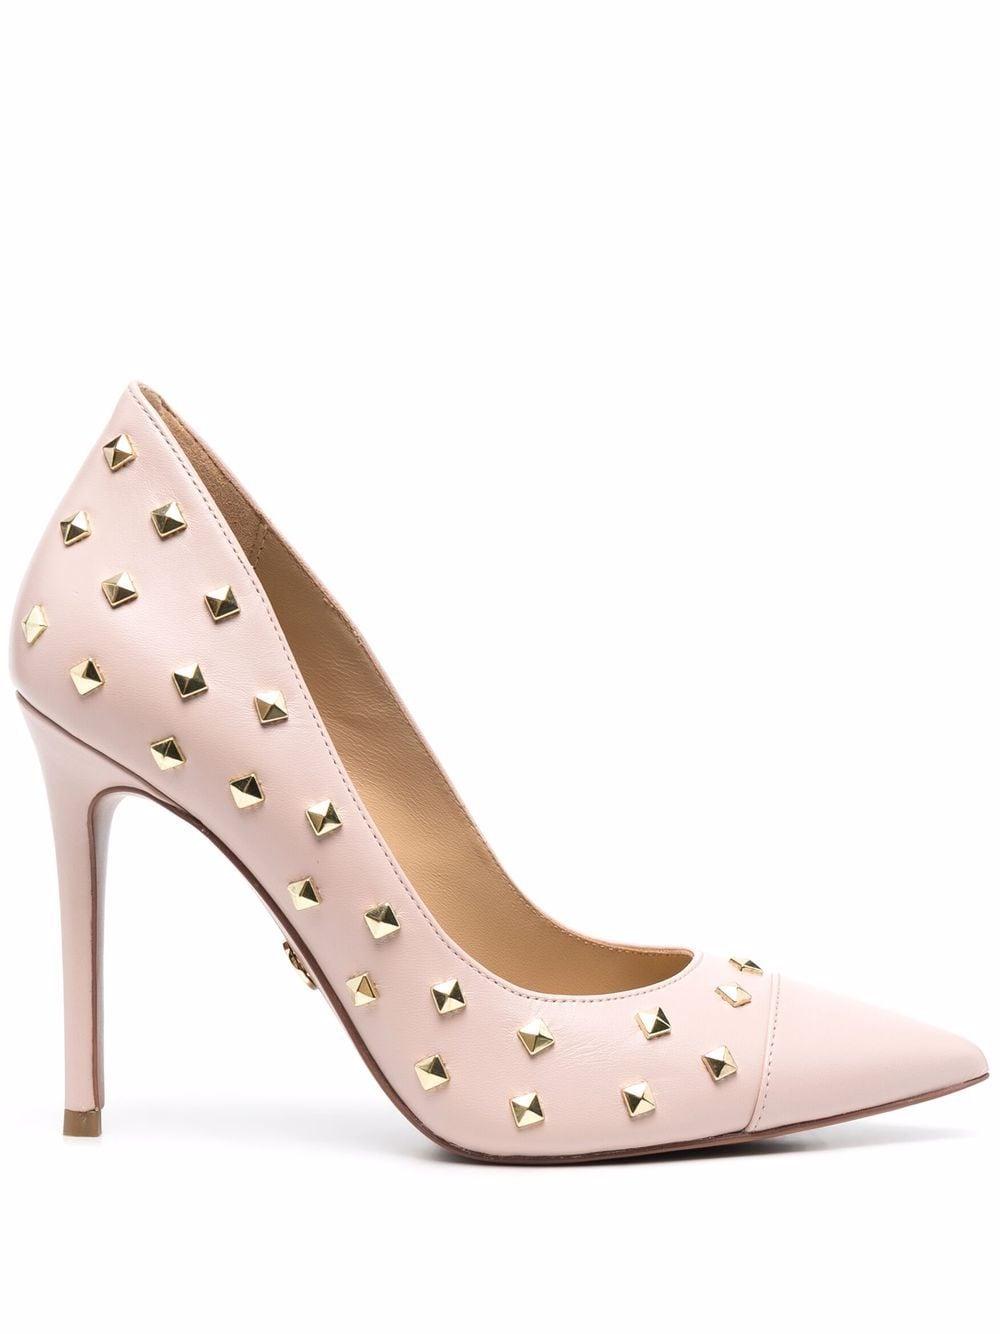 Michael Kors Studded Leather Pumps in Pink | Lyst